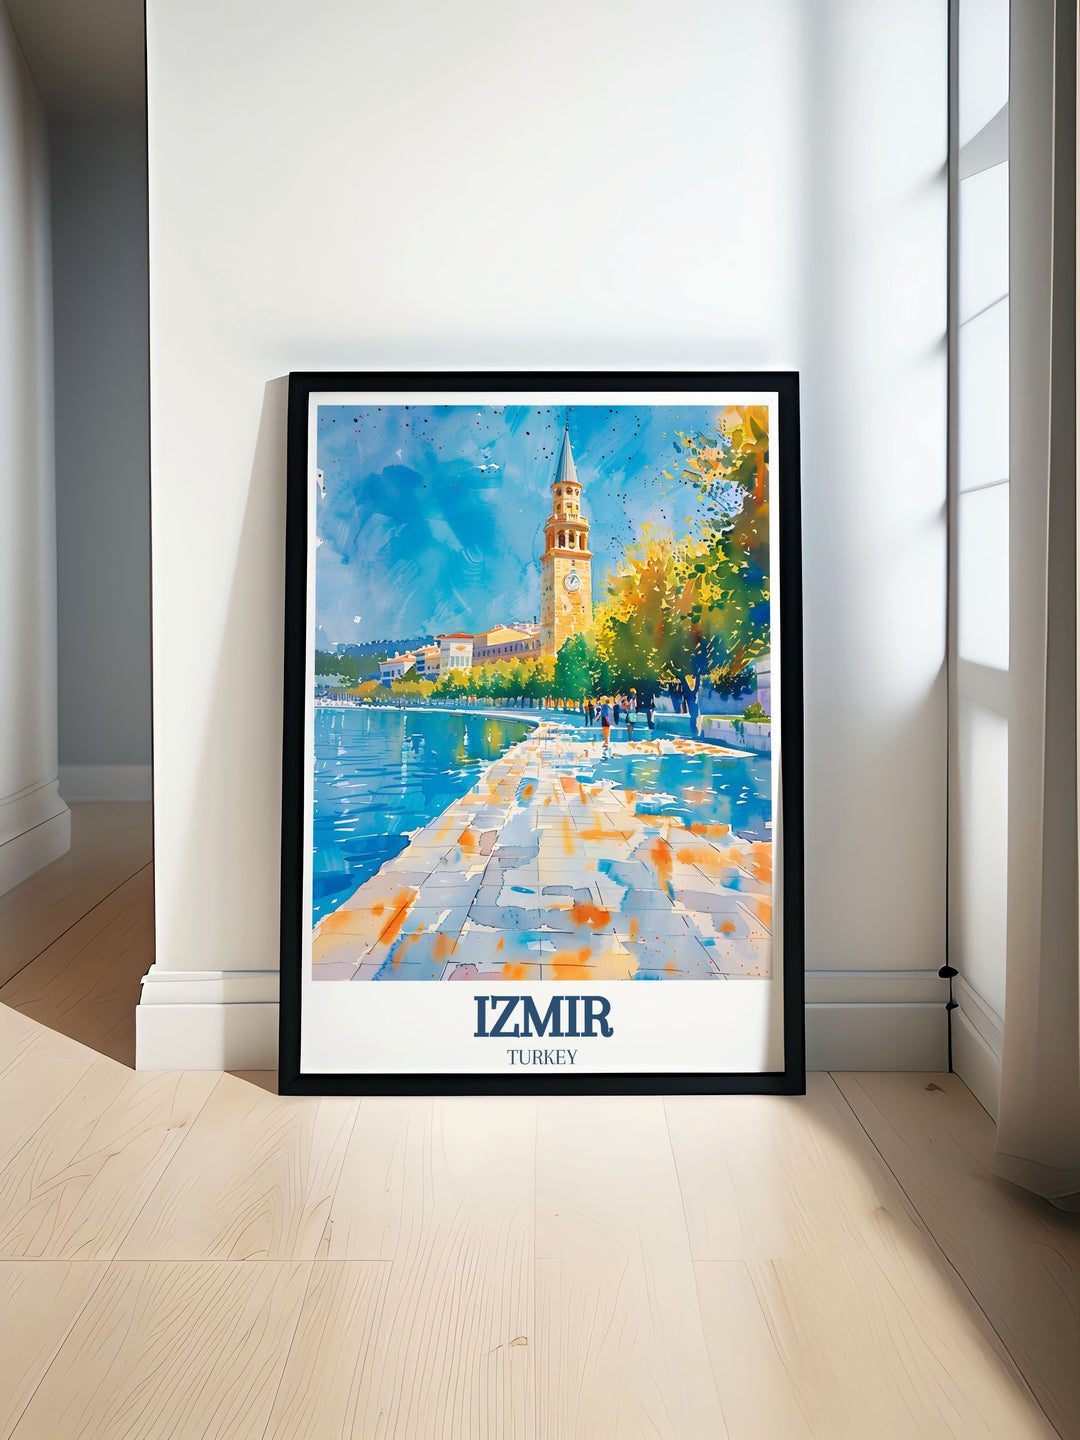 This art print showcases Izmirs Clock Tower, Kordon Promenade, and the Aegean Sea, bringing the timeless beauty and cultural significance of these landmarks into your home.